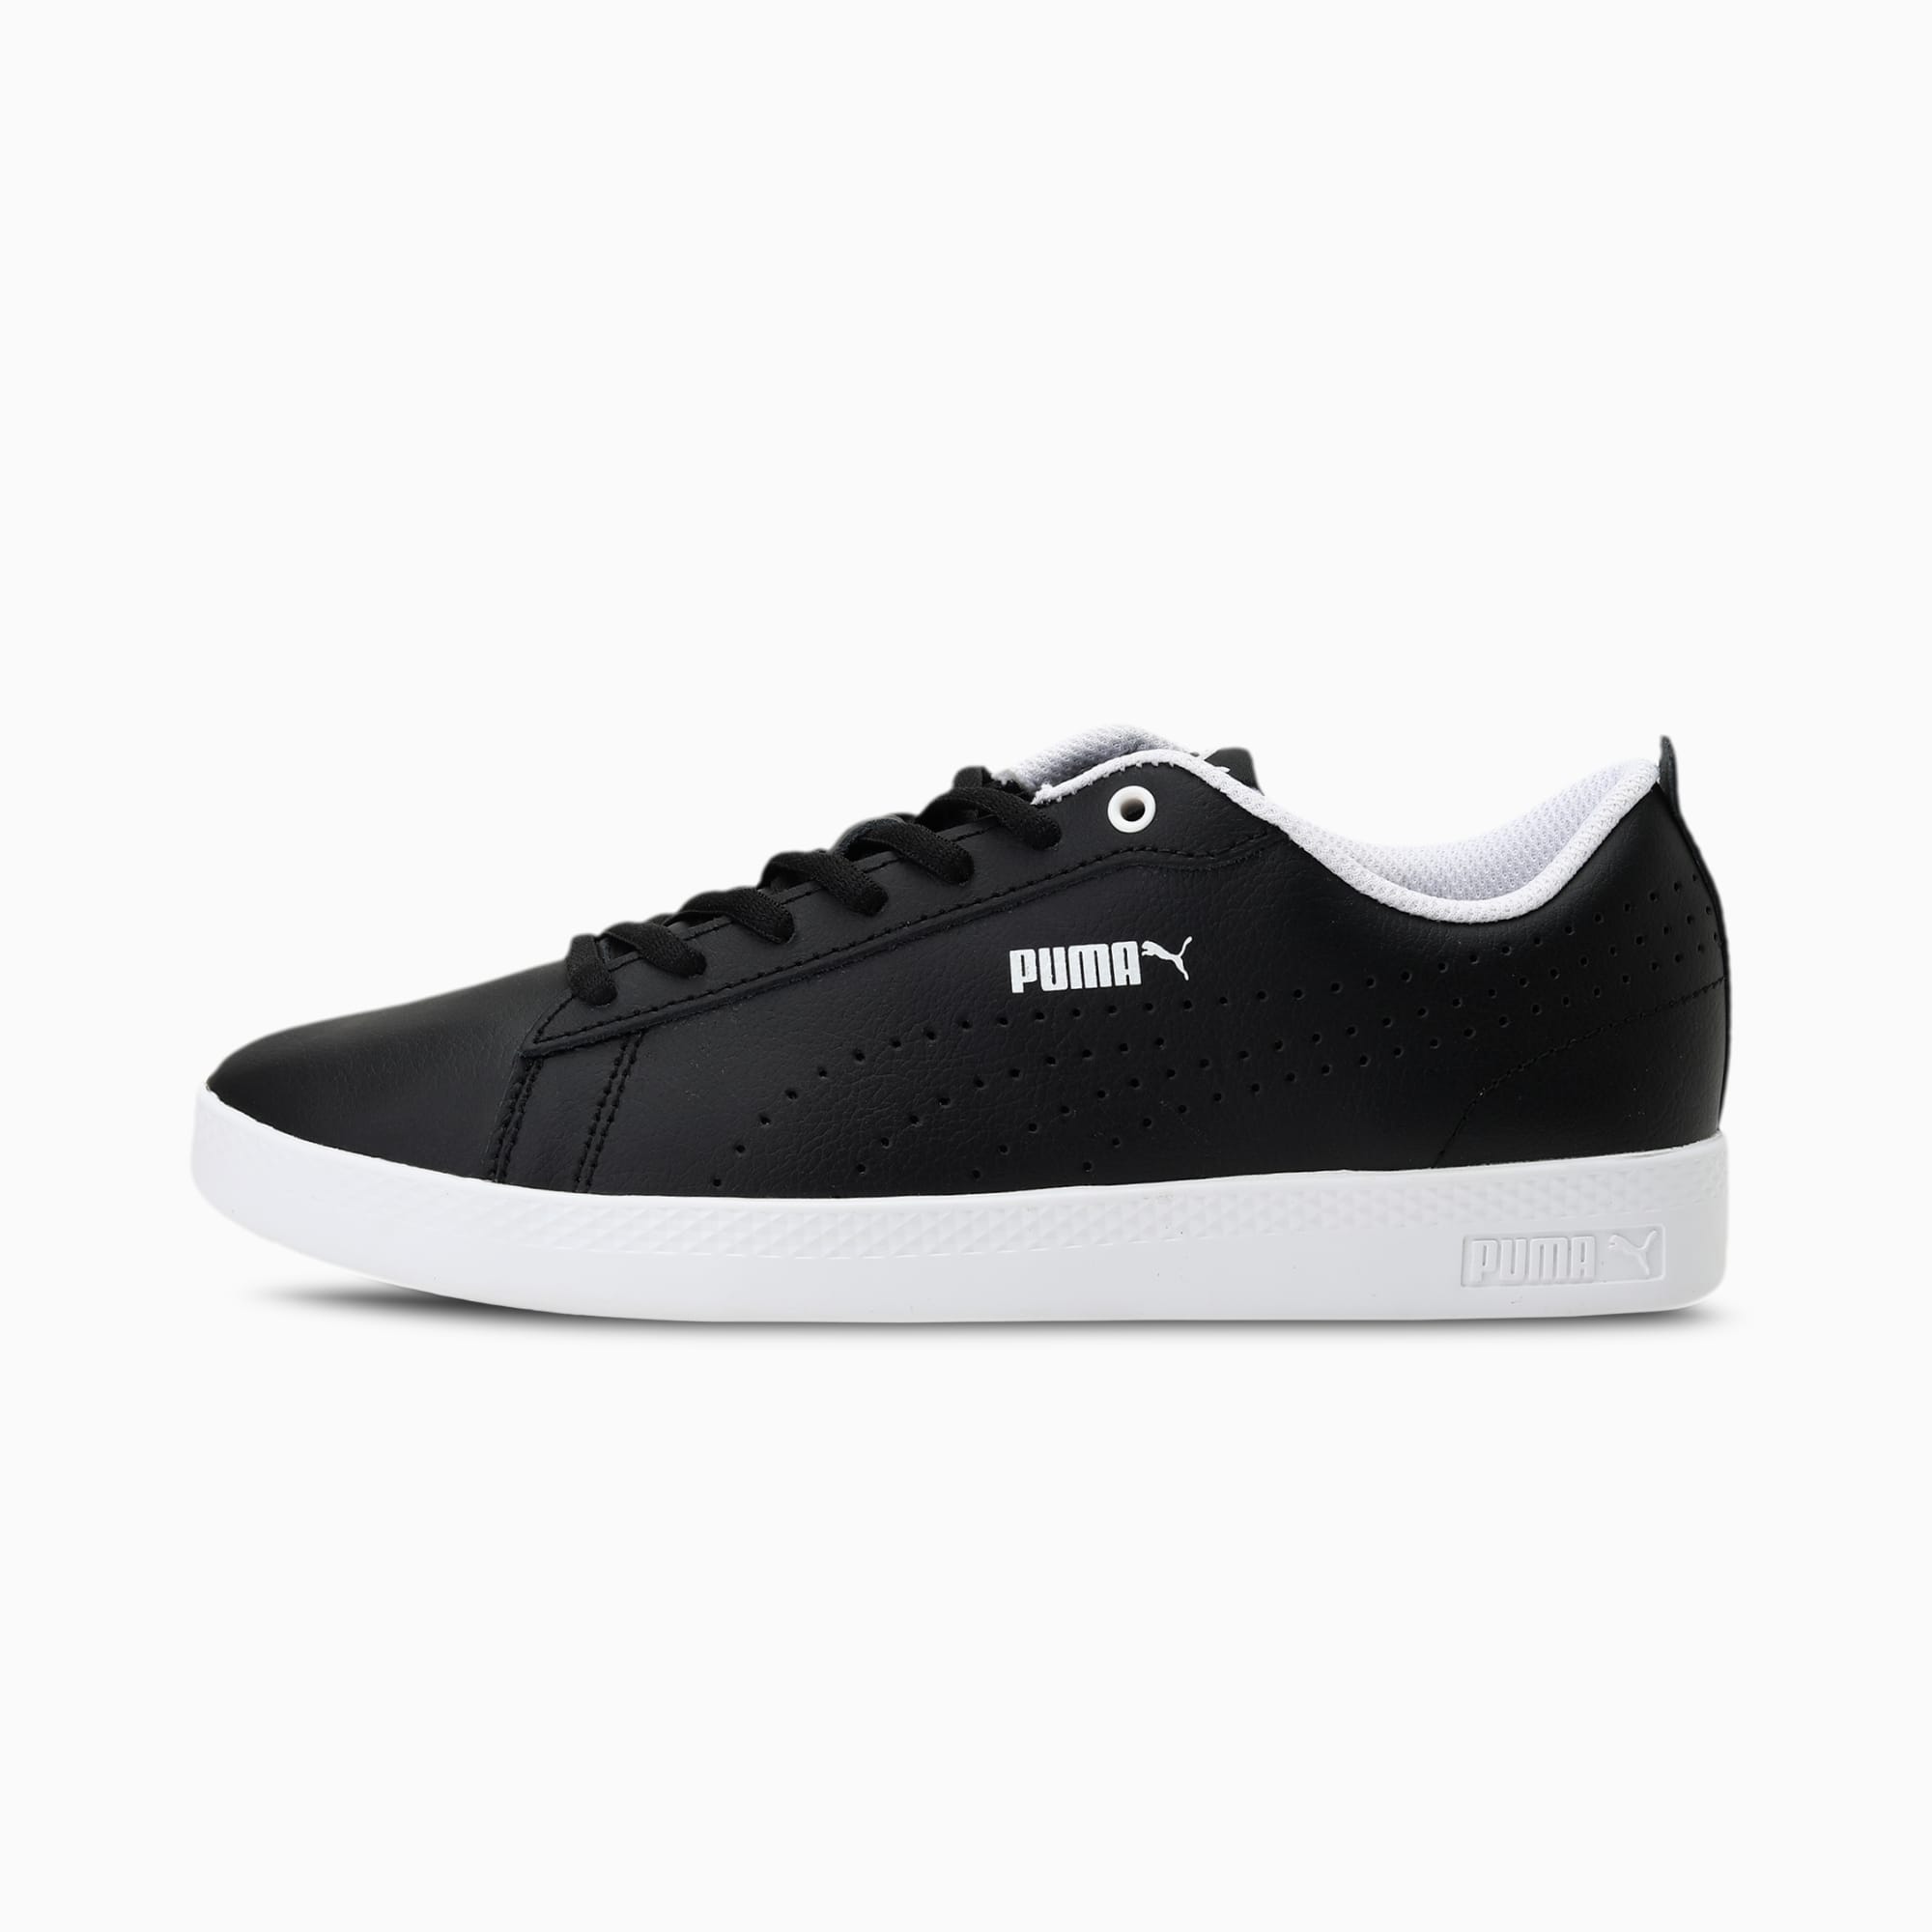 black leather womens tennis shoes